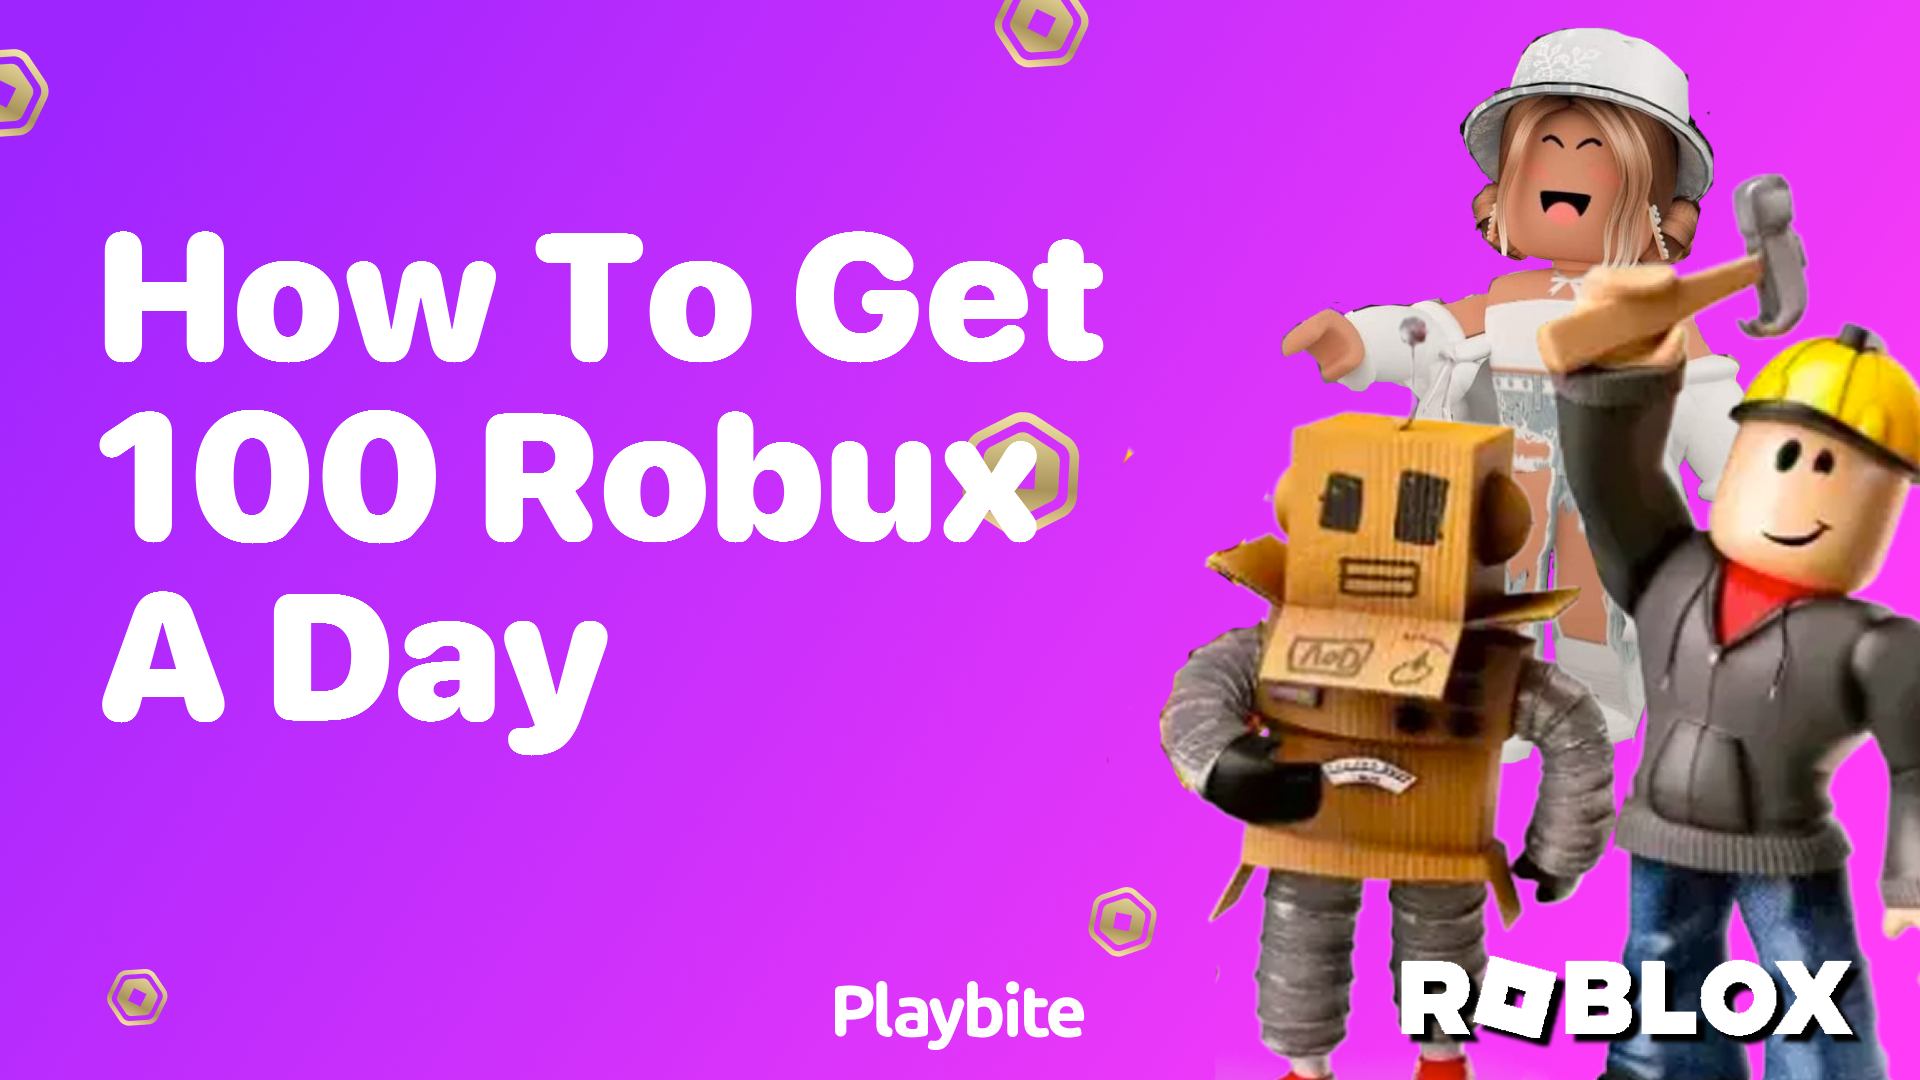 How to Get 100 Robux a Day